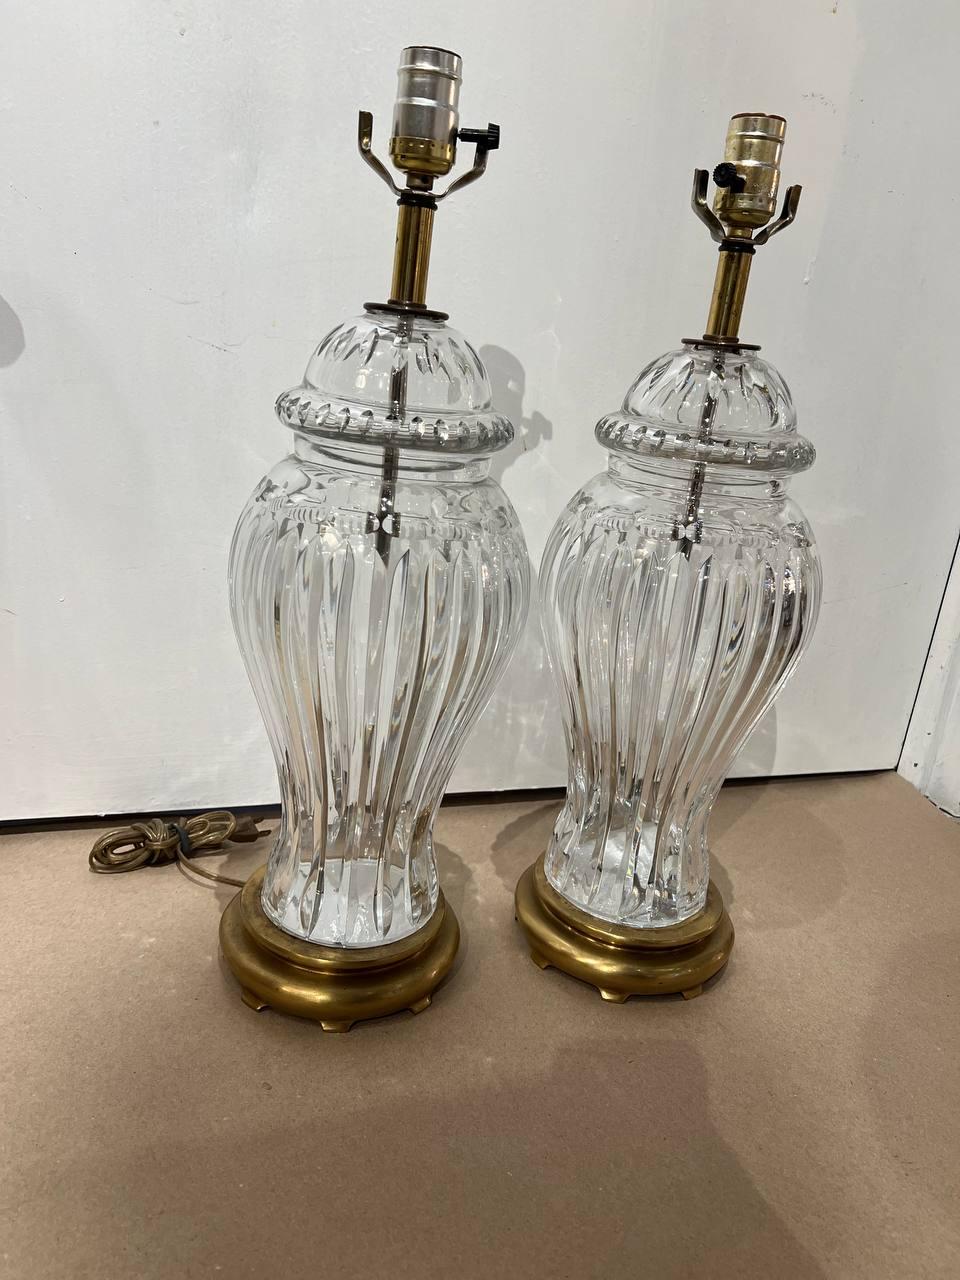 A pair of circa 1920's large cut crystal table lamps with bronze base. Available matching pair, but with different base